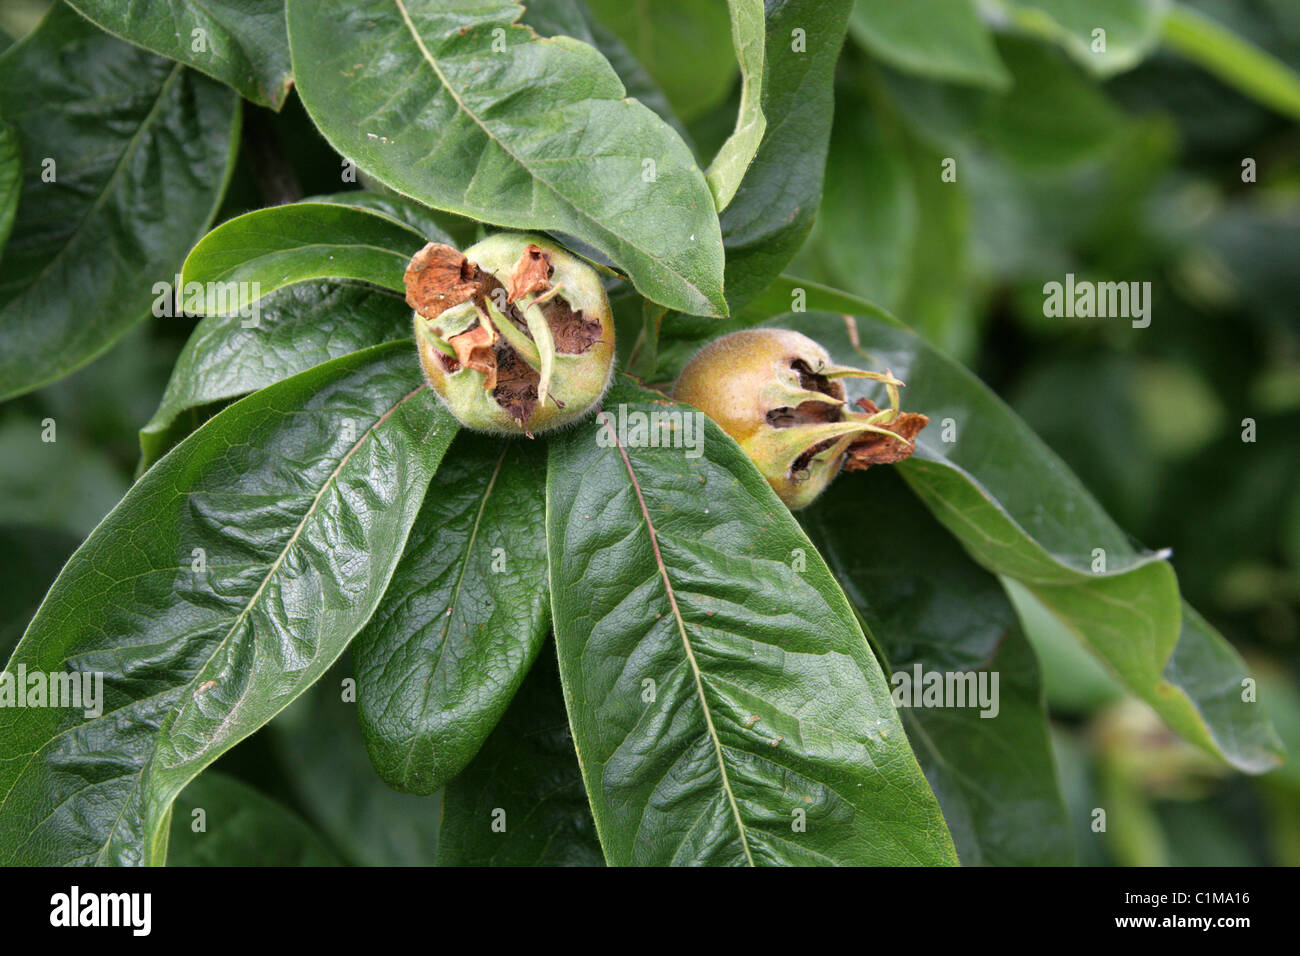 Common Quince, Fruiting Quince, Quince, Quince Seeds, Quince Tree, Wen Po, Cydonia oblonga, Rosaceae. Native to Central Asia. Stock Photo